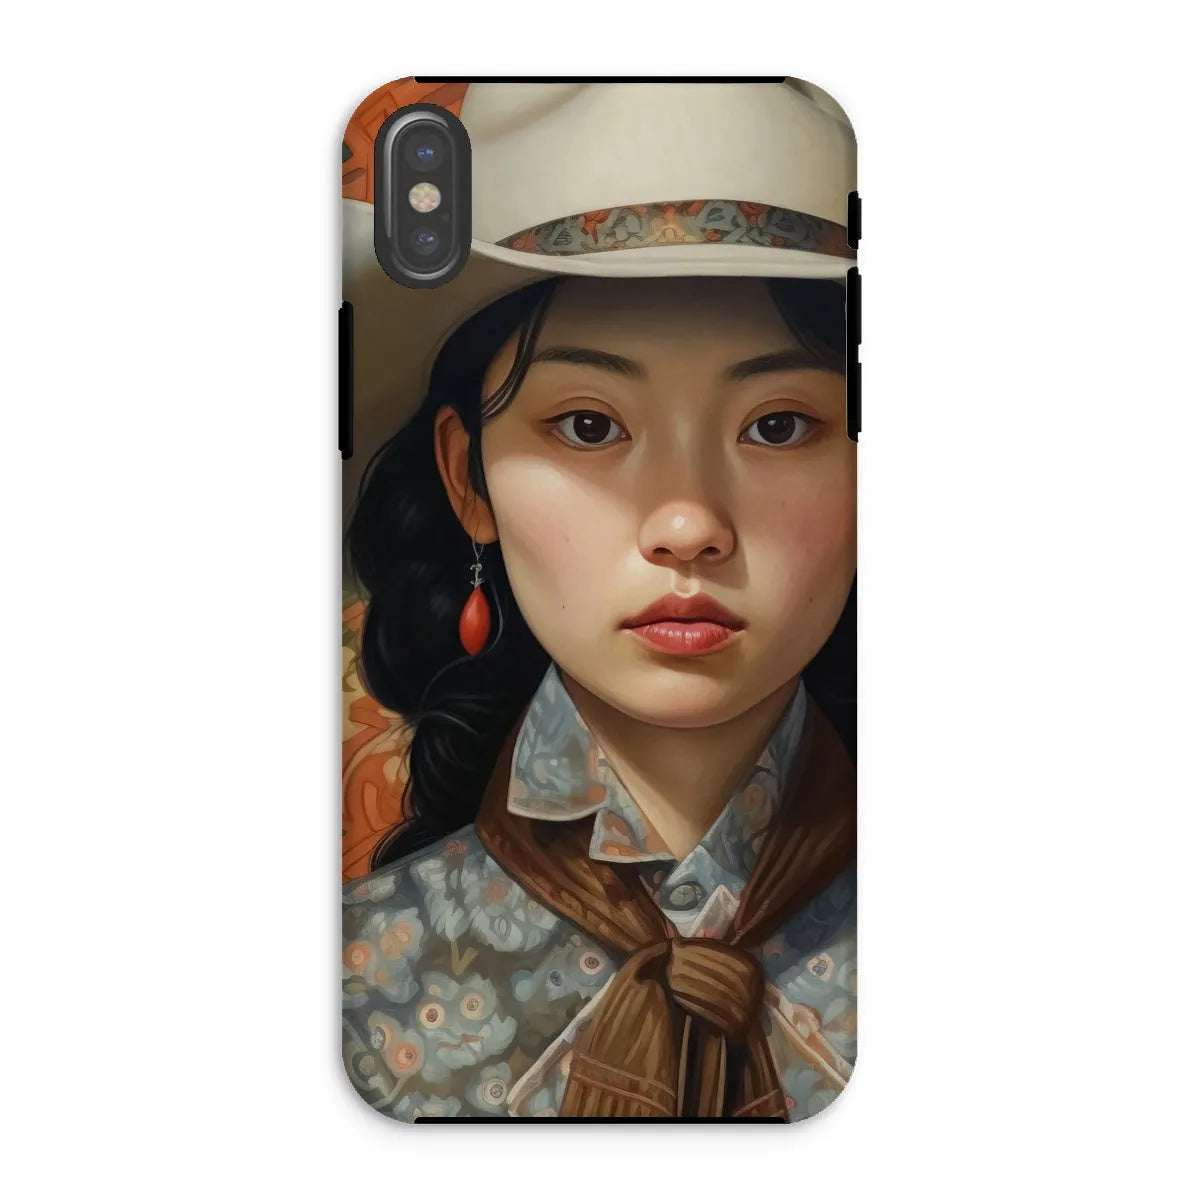 Zhi The Lesbian Cowgirl - Sapphic Art Phone Case - Iphone Xs / Matte - Mobile Phone Cases - Aesthetic Art